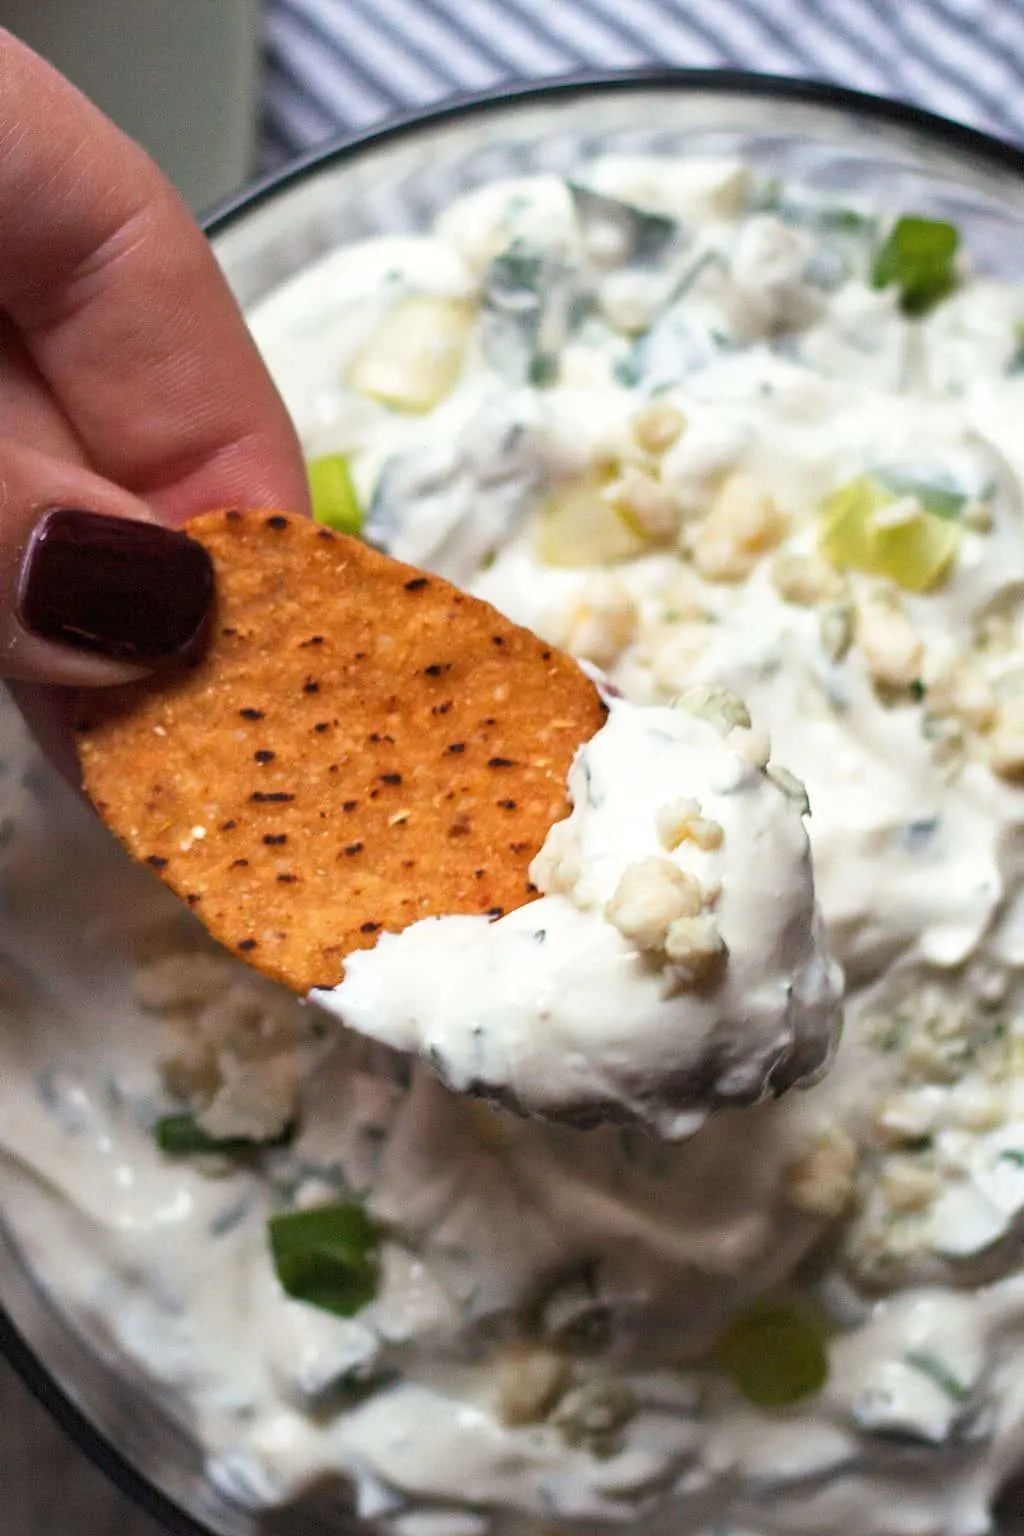 creamy blue cheese dip with a hand holding a chip